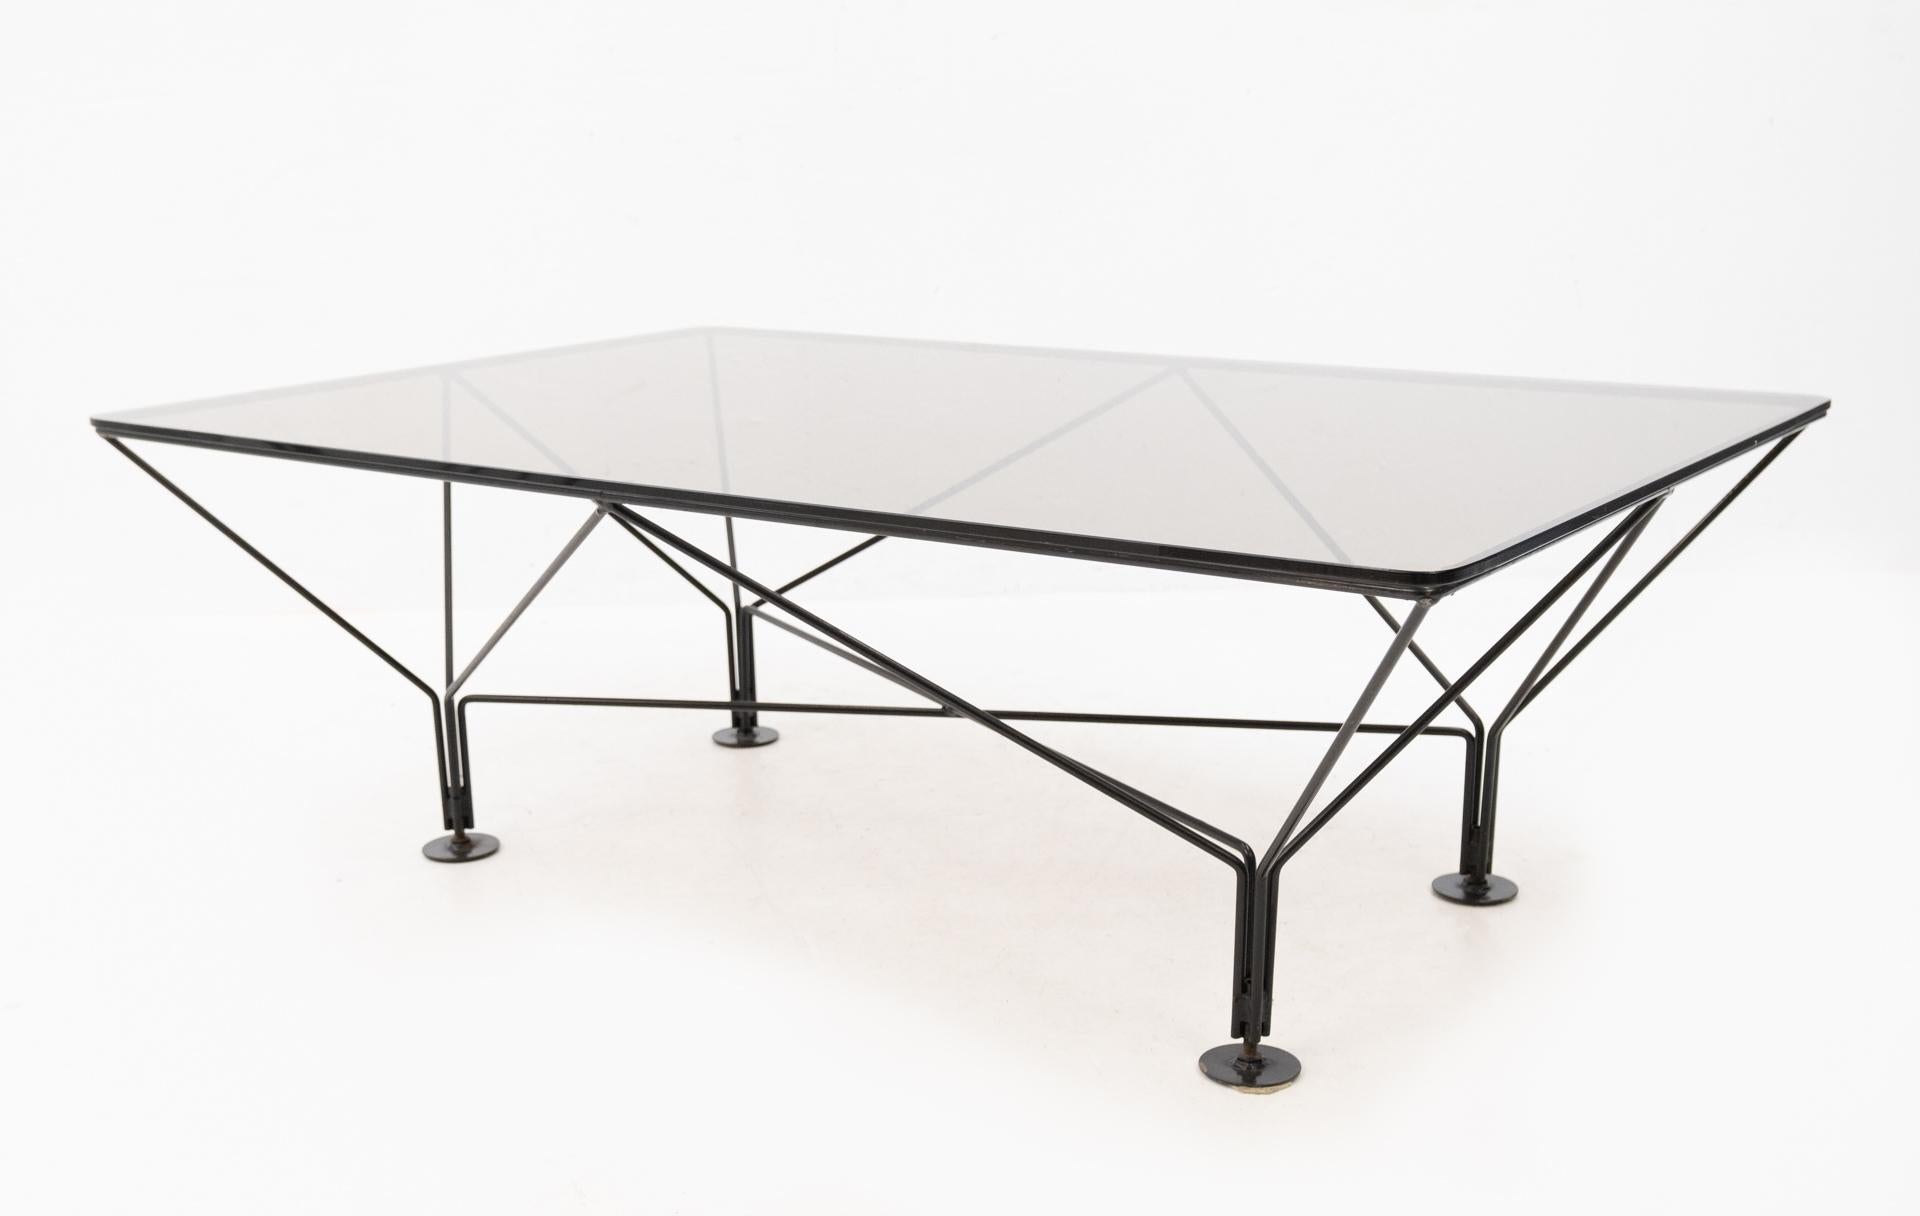 Steel Paolo Piva Style Smoked Glass Coffee Table, 1980s